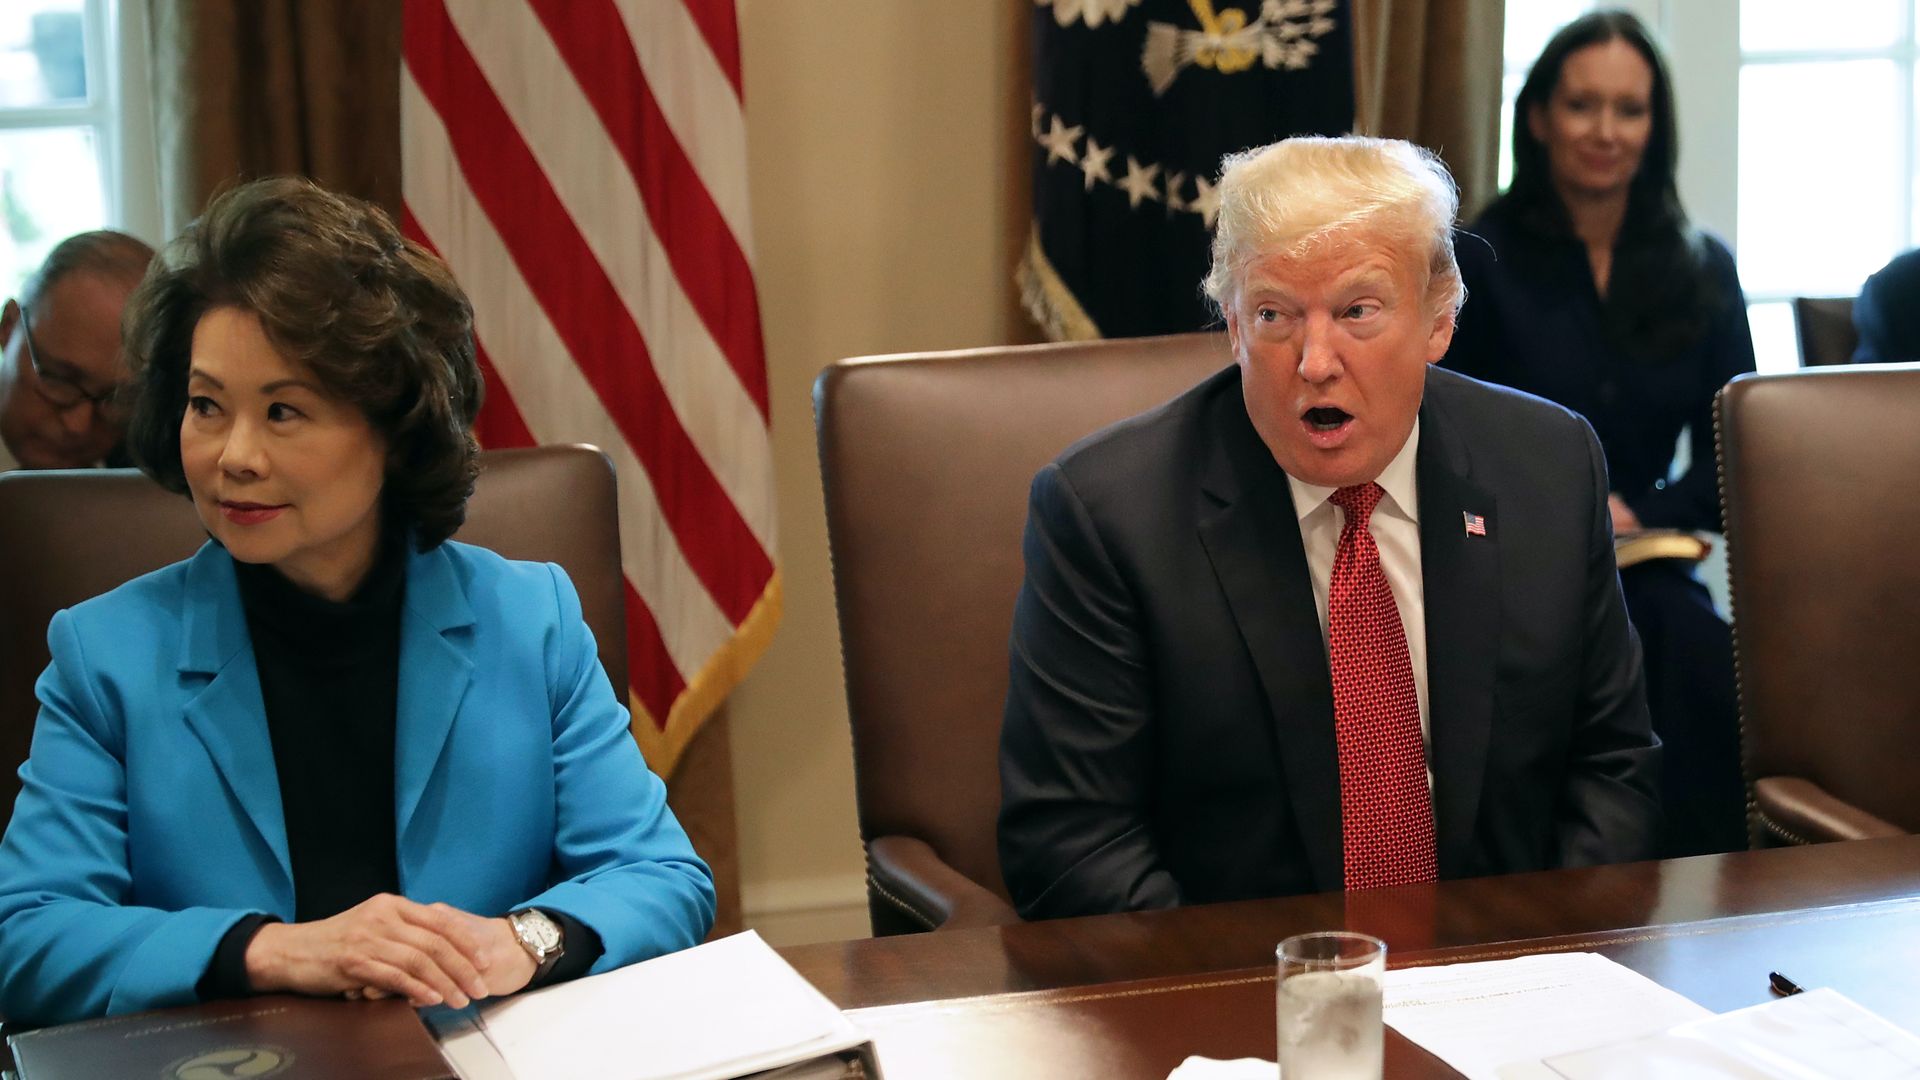 President Donald Trump conducts a cabinet meeting with Transportation Secretary Elaine Chao (L) 